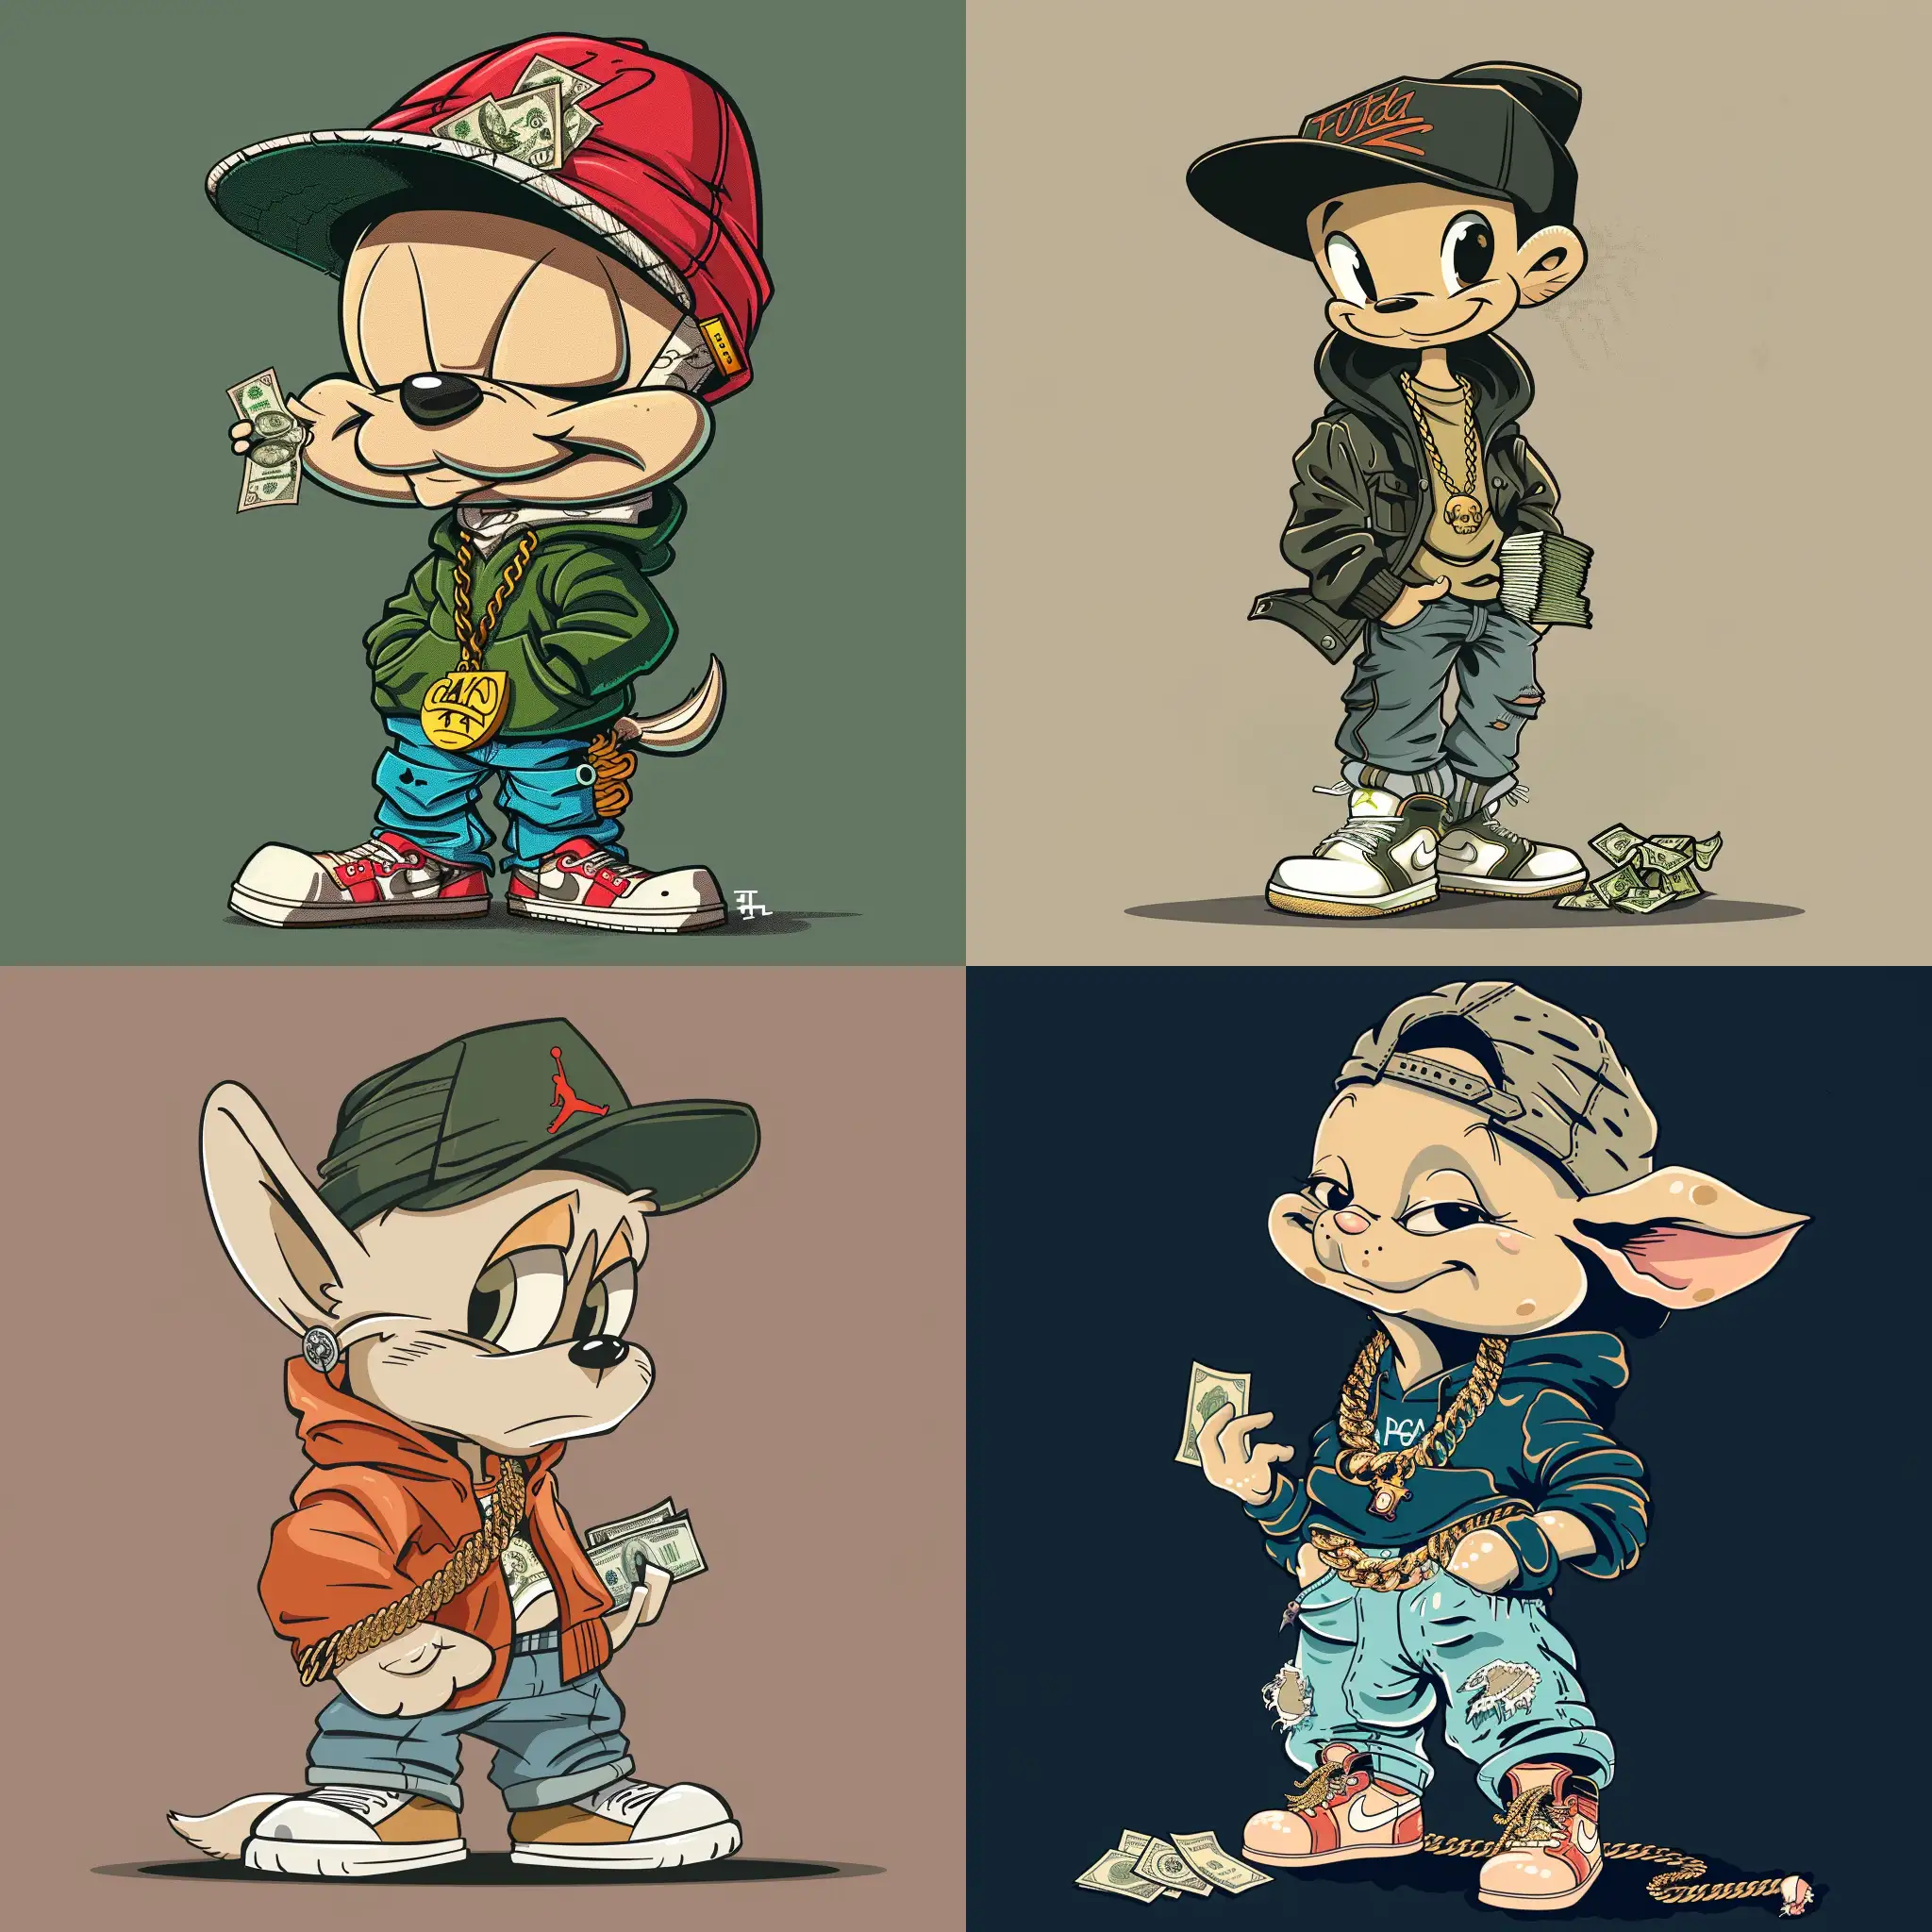 CREATE ME A CARTOON OF ELMER FUDD FROM LOONEY TUNES WITH A SNAPBACK HAT, HOODIE, JEANS, DESIGNER BELT, CUBAN LINK CHAIN ON, STACK OF MONEY IN HIS HAND AND JORDAN RETRO 6 SHOES

